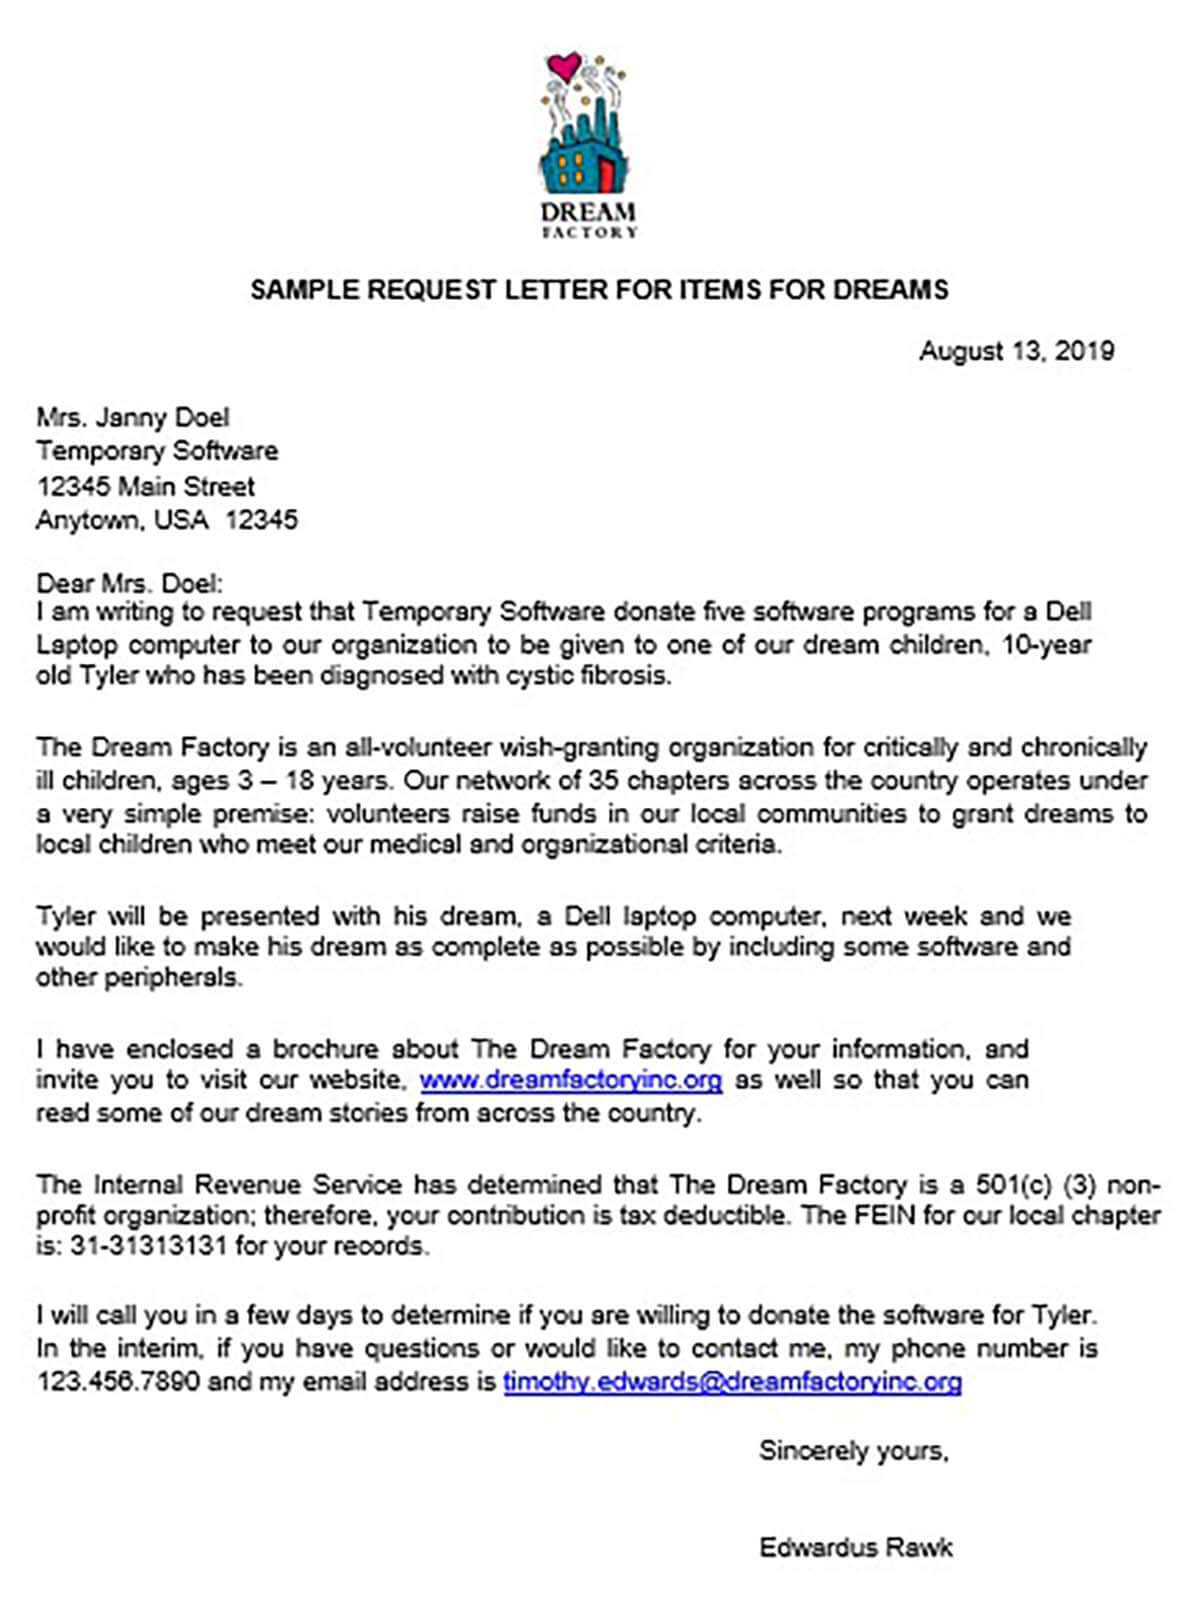 Sample Letter Requesting Donations from moussyusa.com